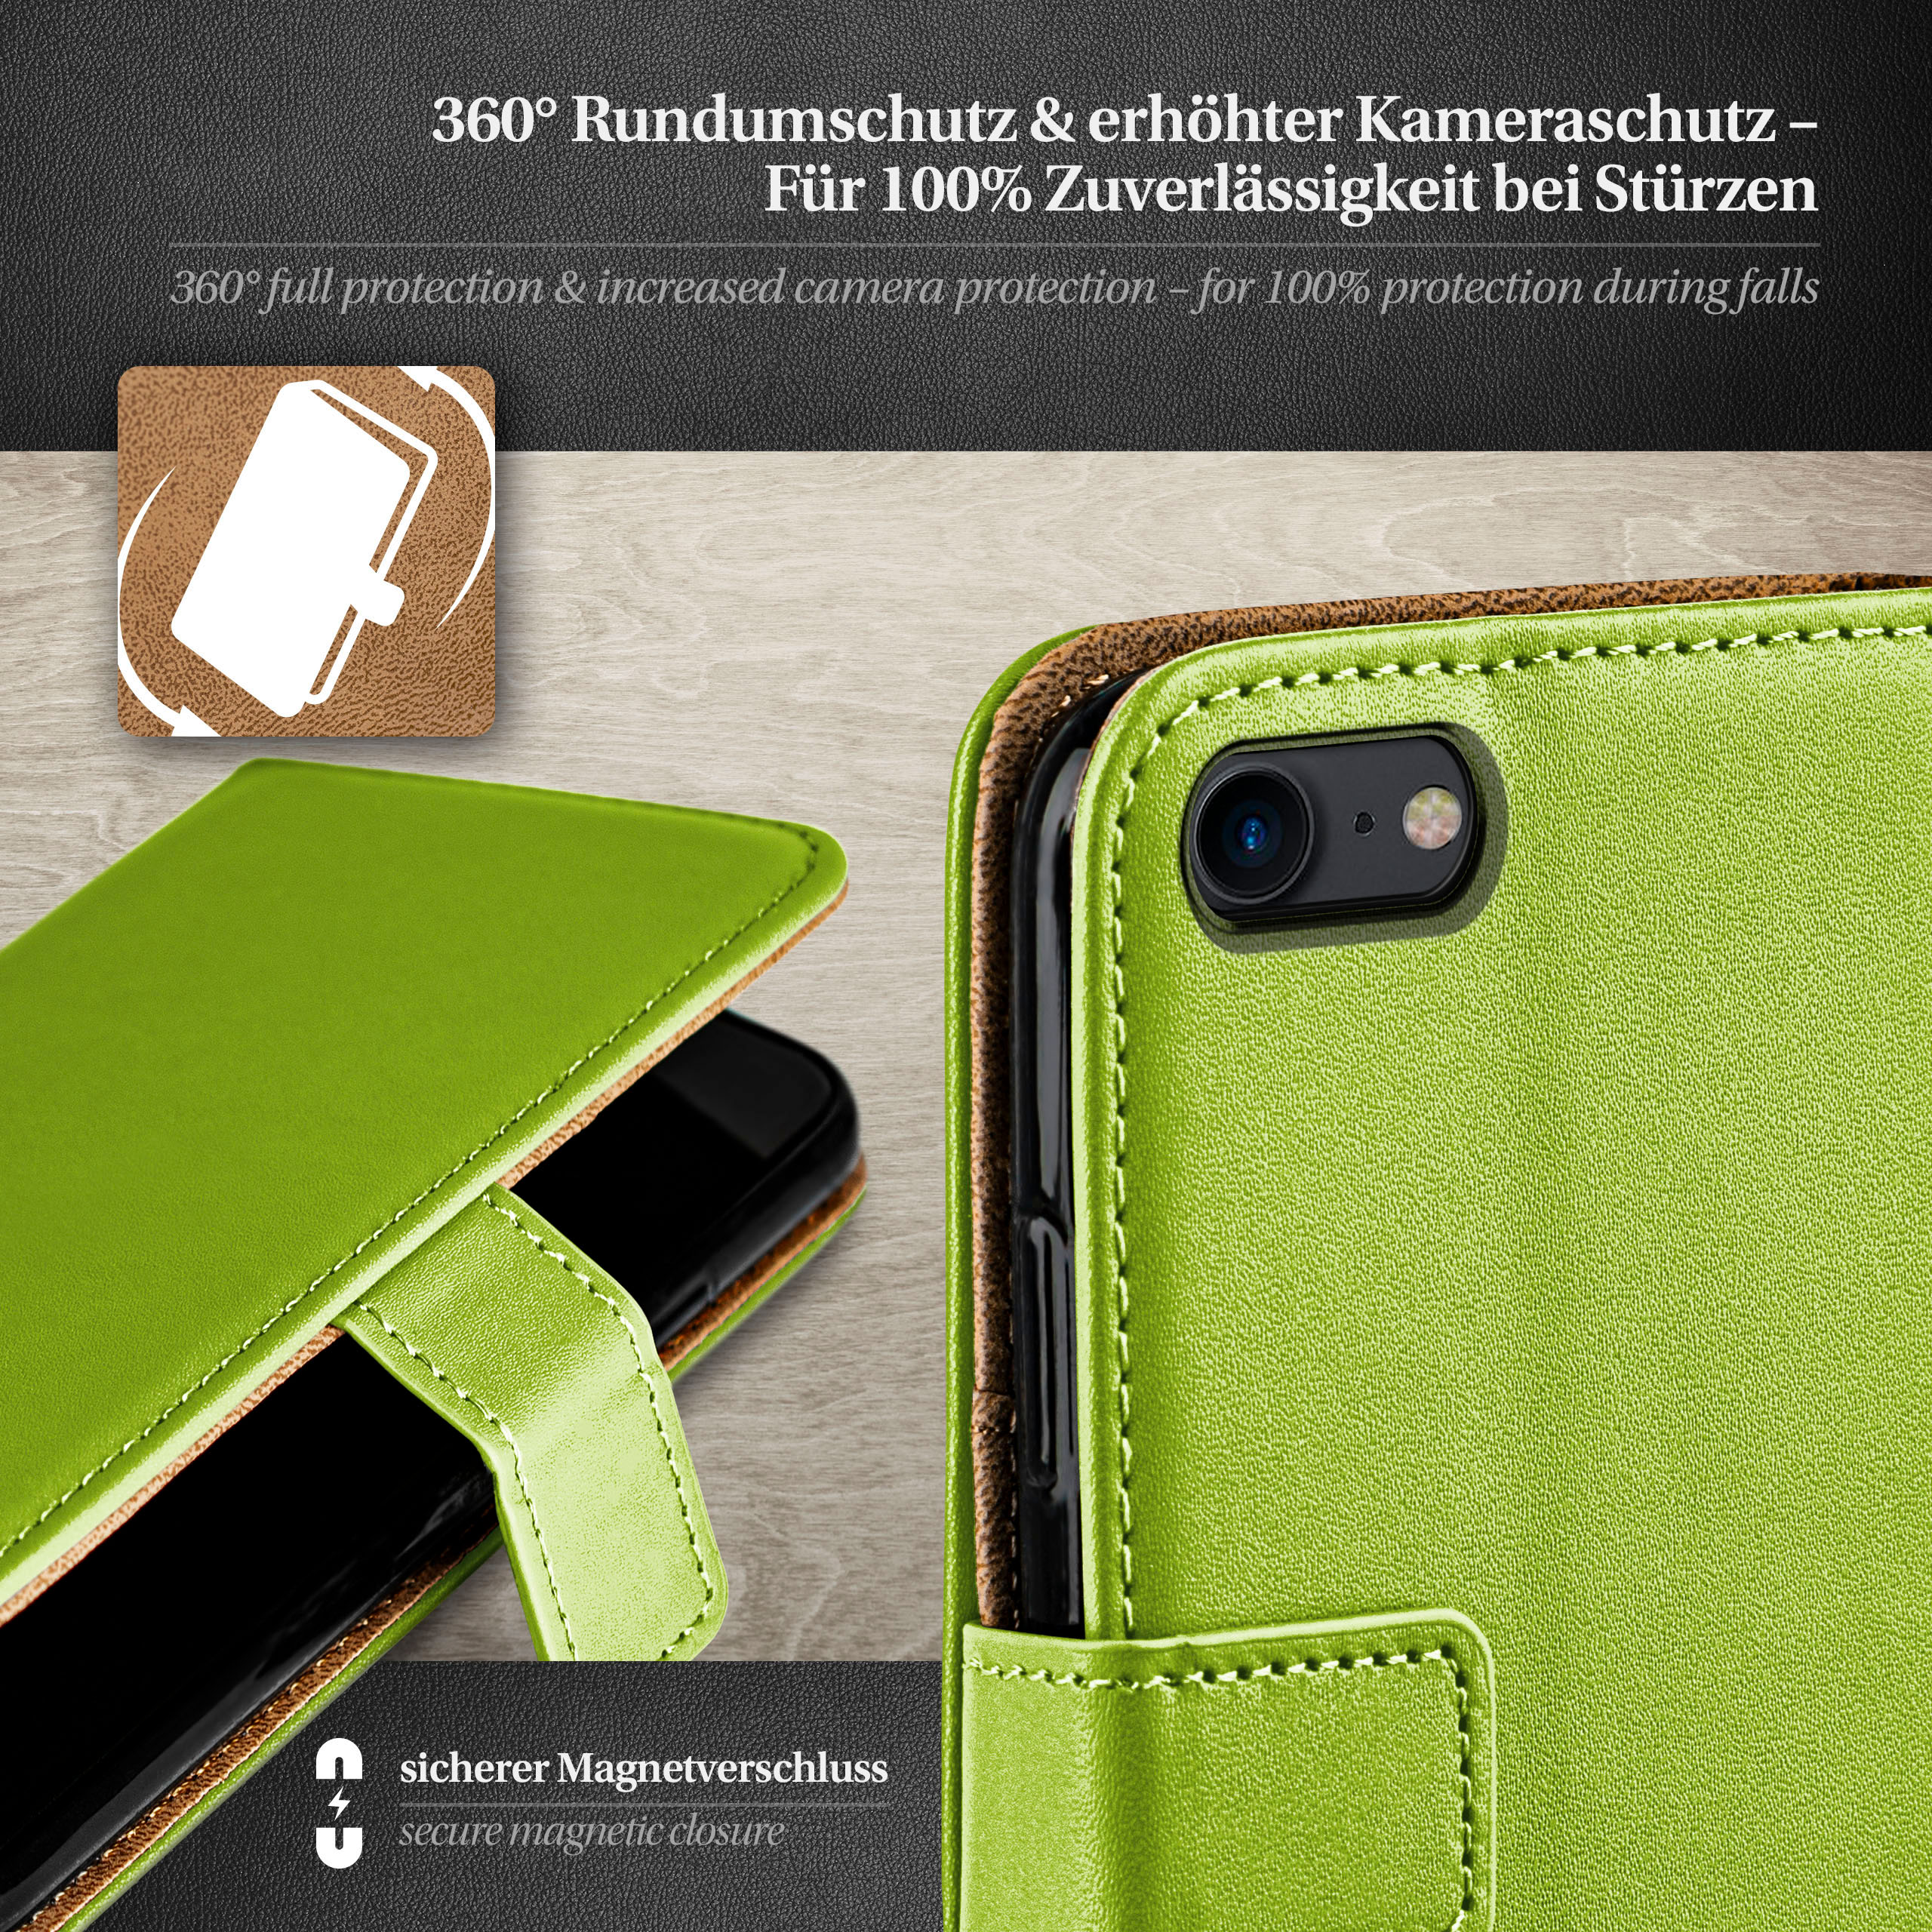 / 7 8, iPhone Case, MOEX iPhone Lime-Green Book Bookcover, Apple,